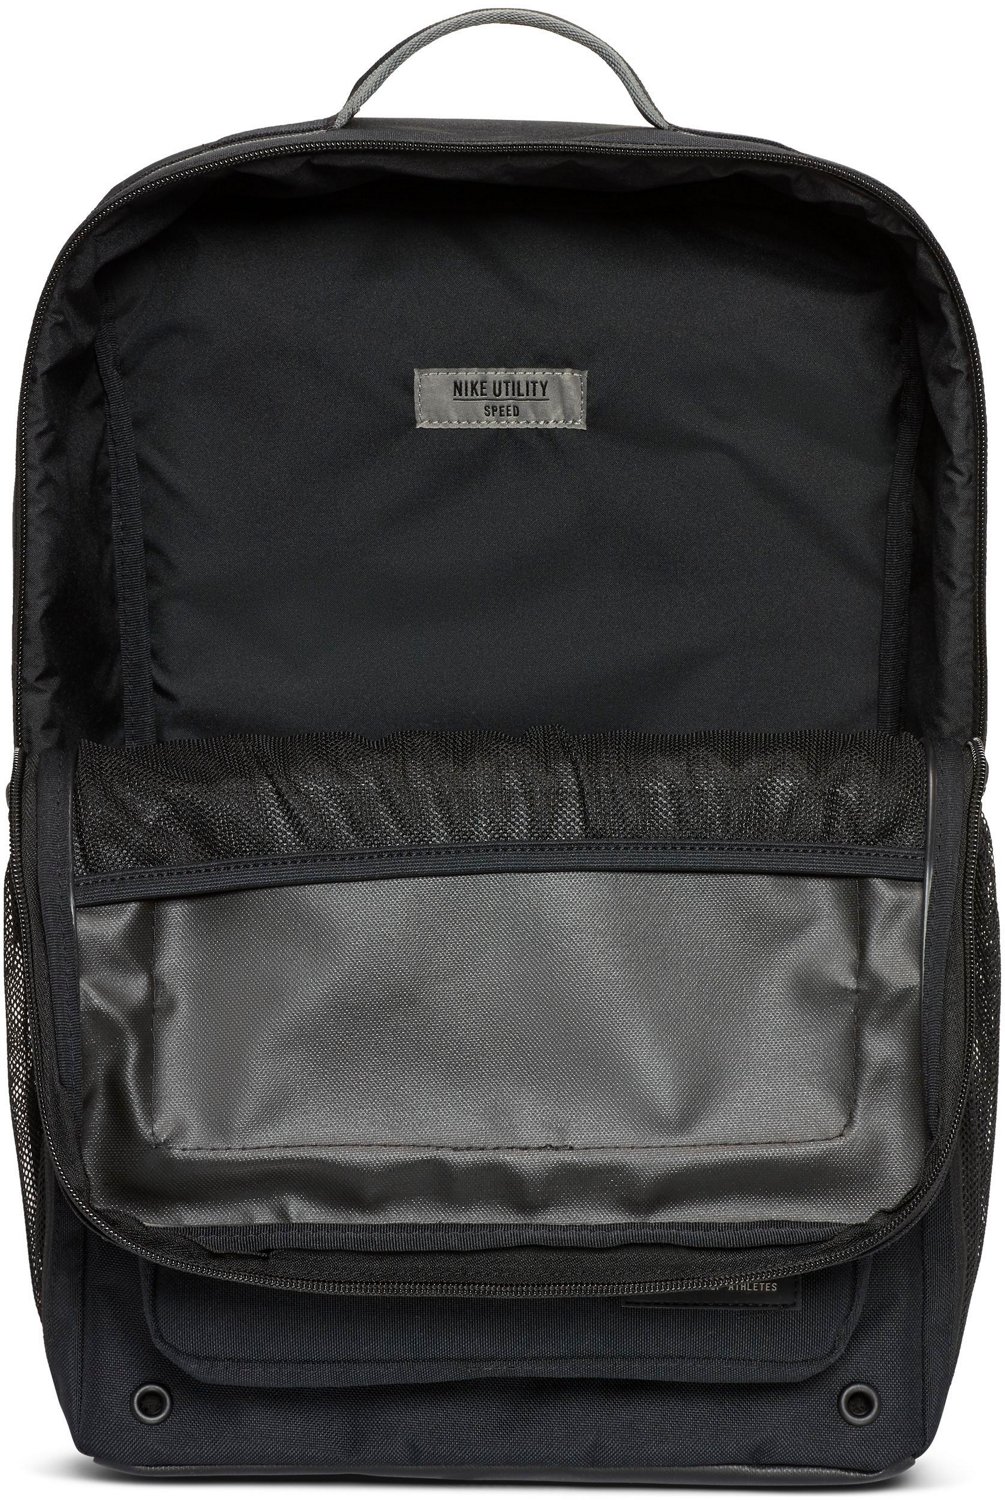 Nike Utility Speed Training Backpack | Free Shipping at Academy